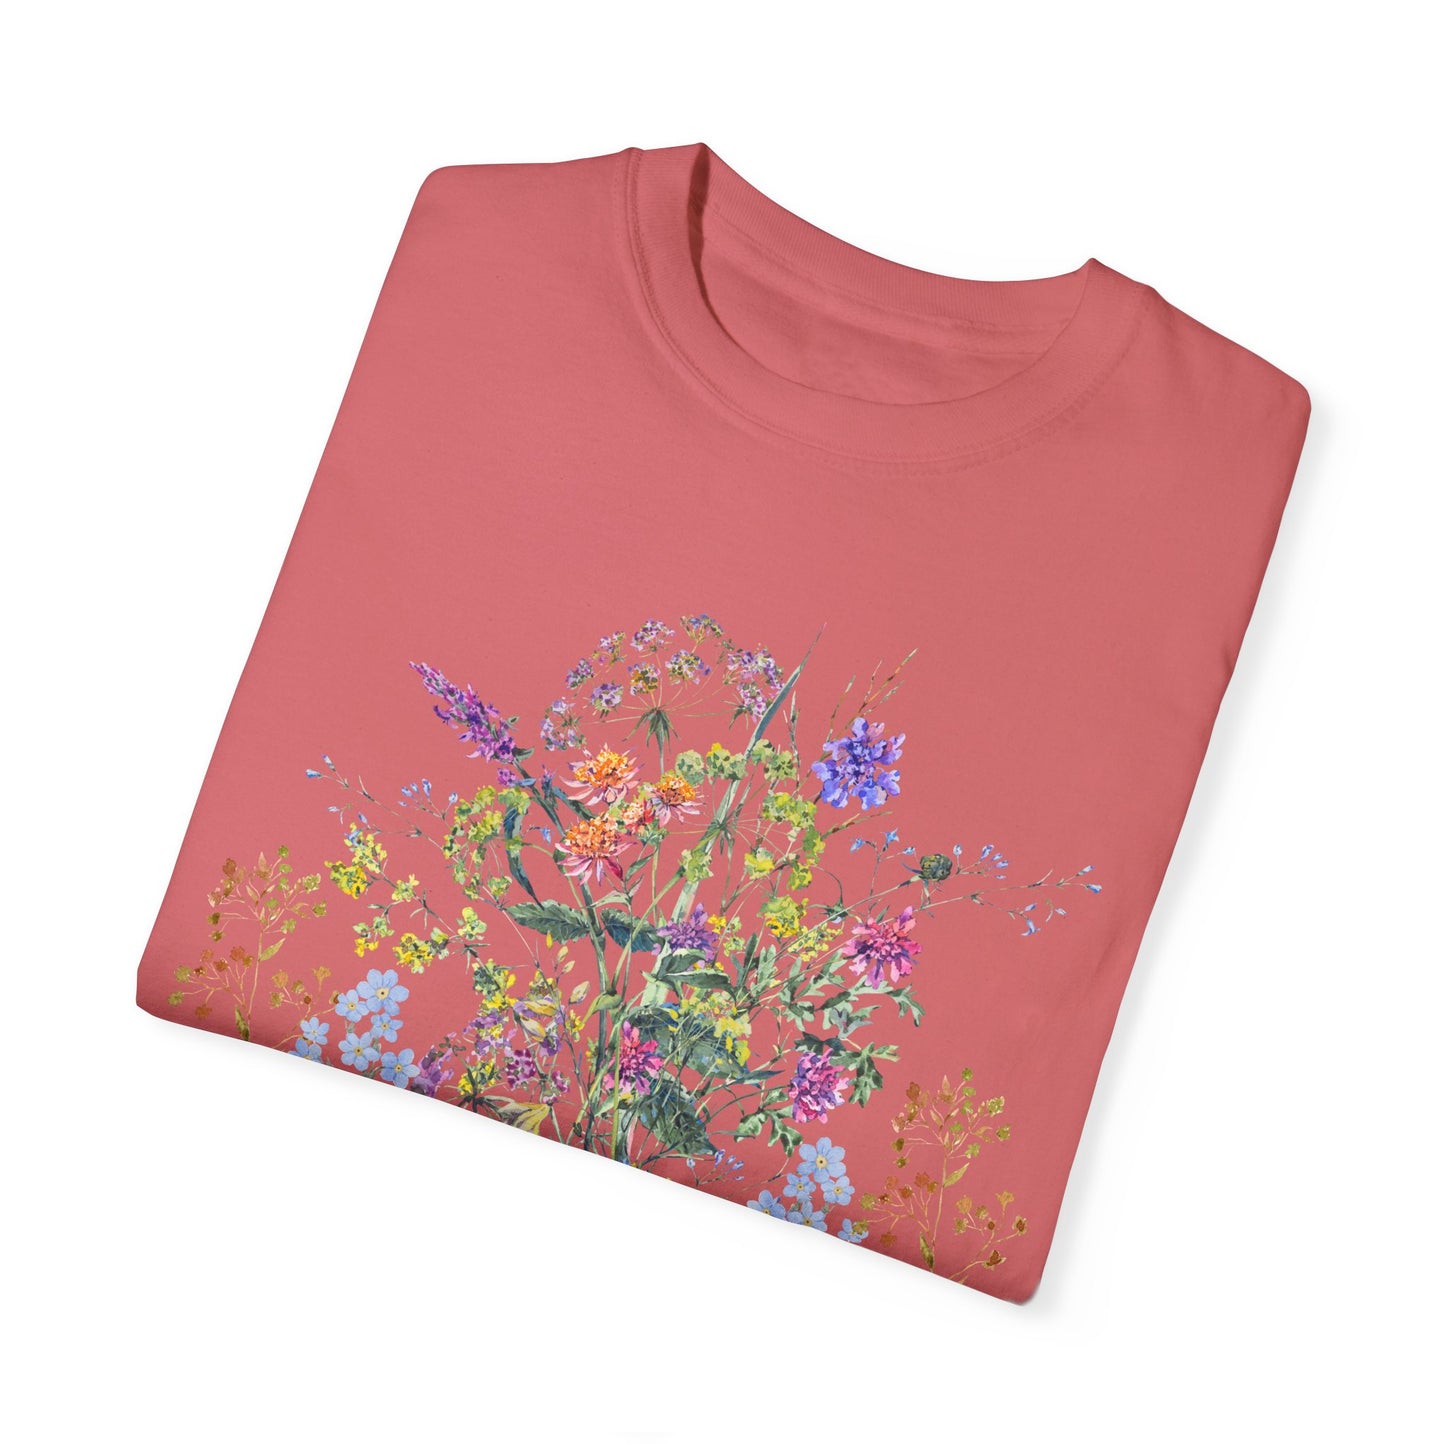 Wildflowers Mama Shirt, Retro Mom TShirt, Mother's Day Gift, Flower Shirts for Women, Floral New Mom Gift, Comfort Colors Shirt, CC1615